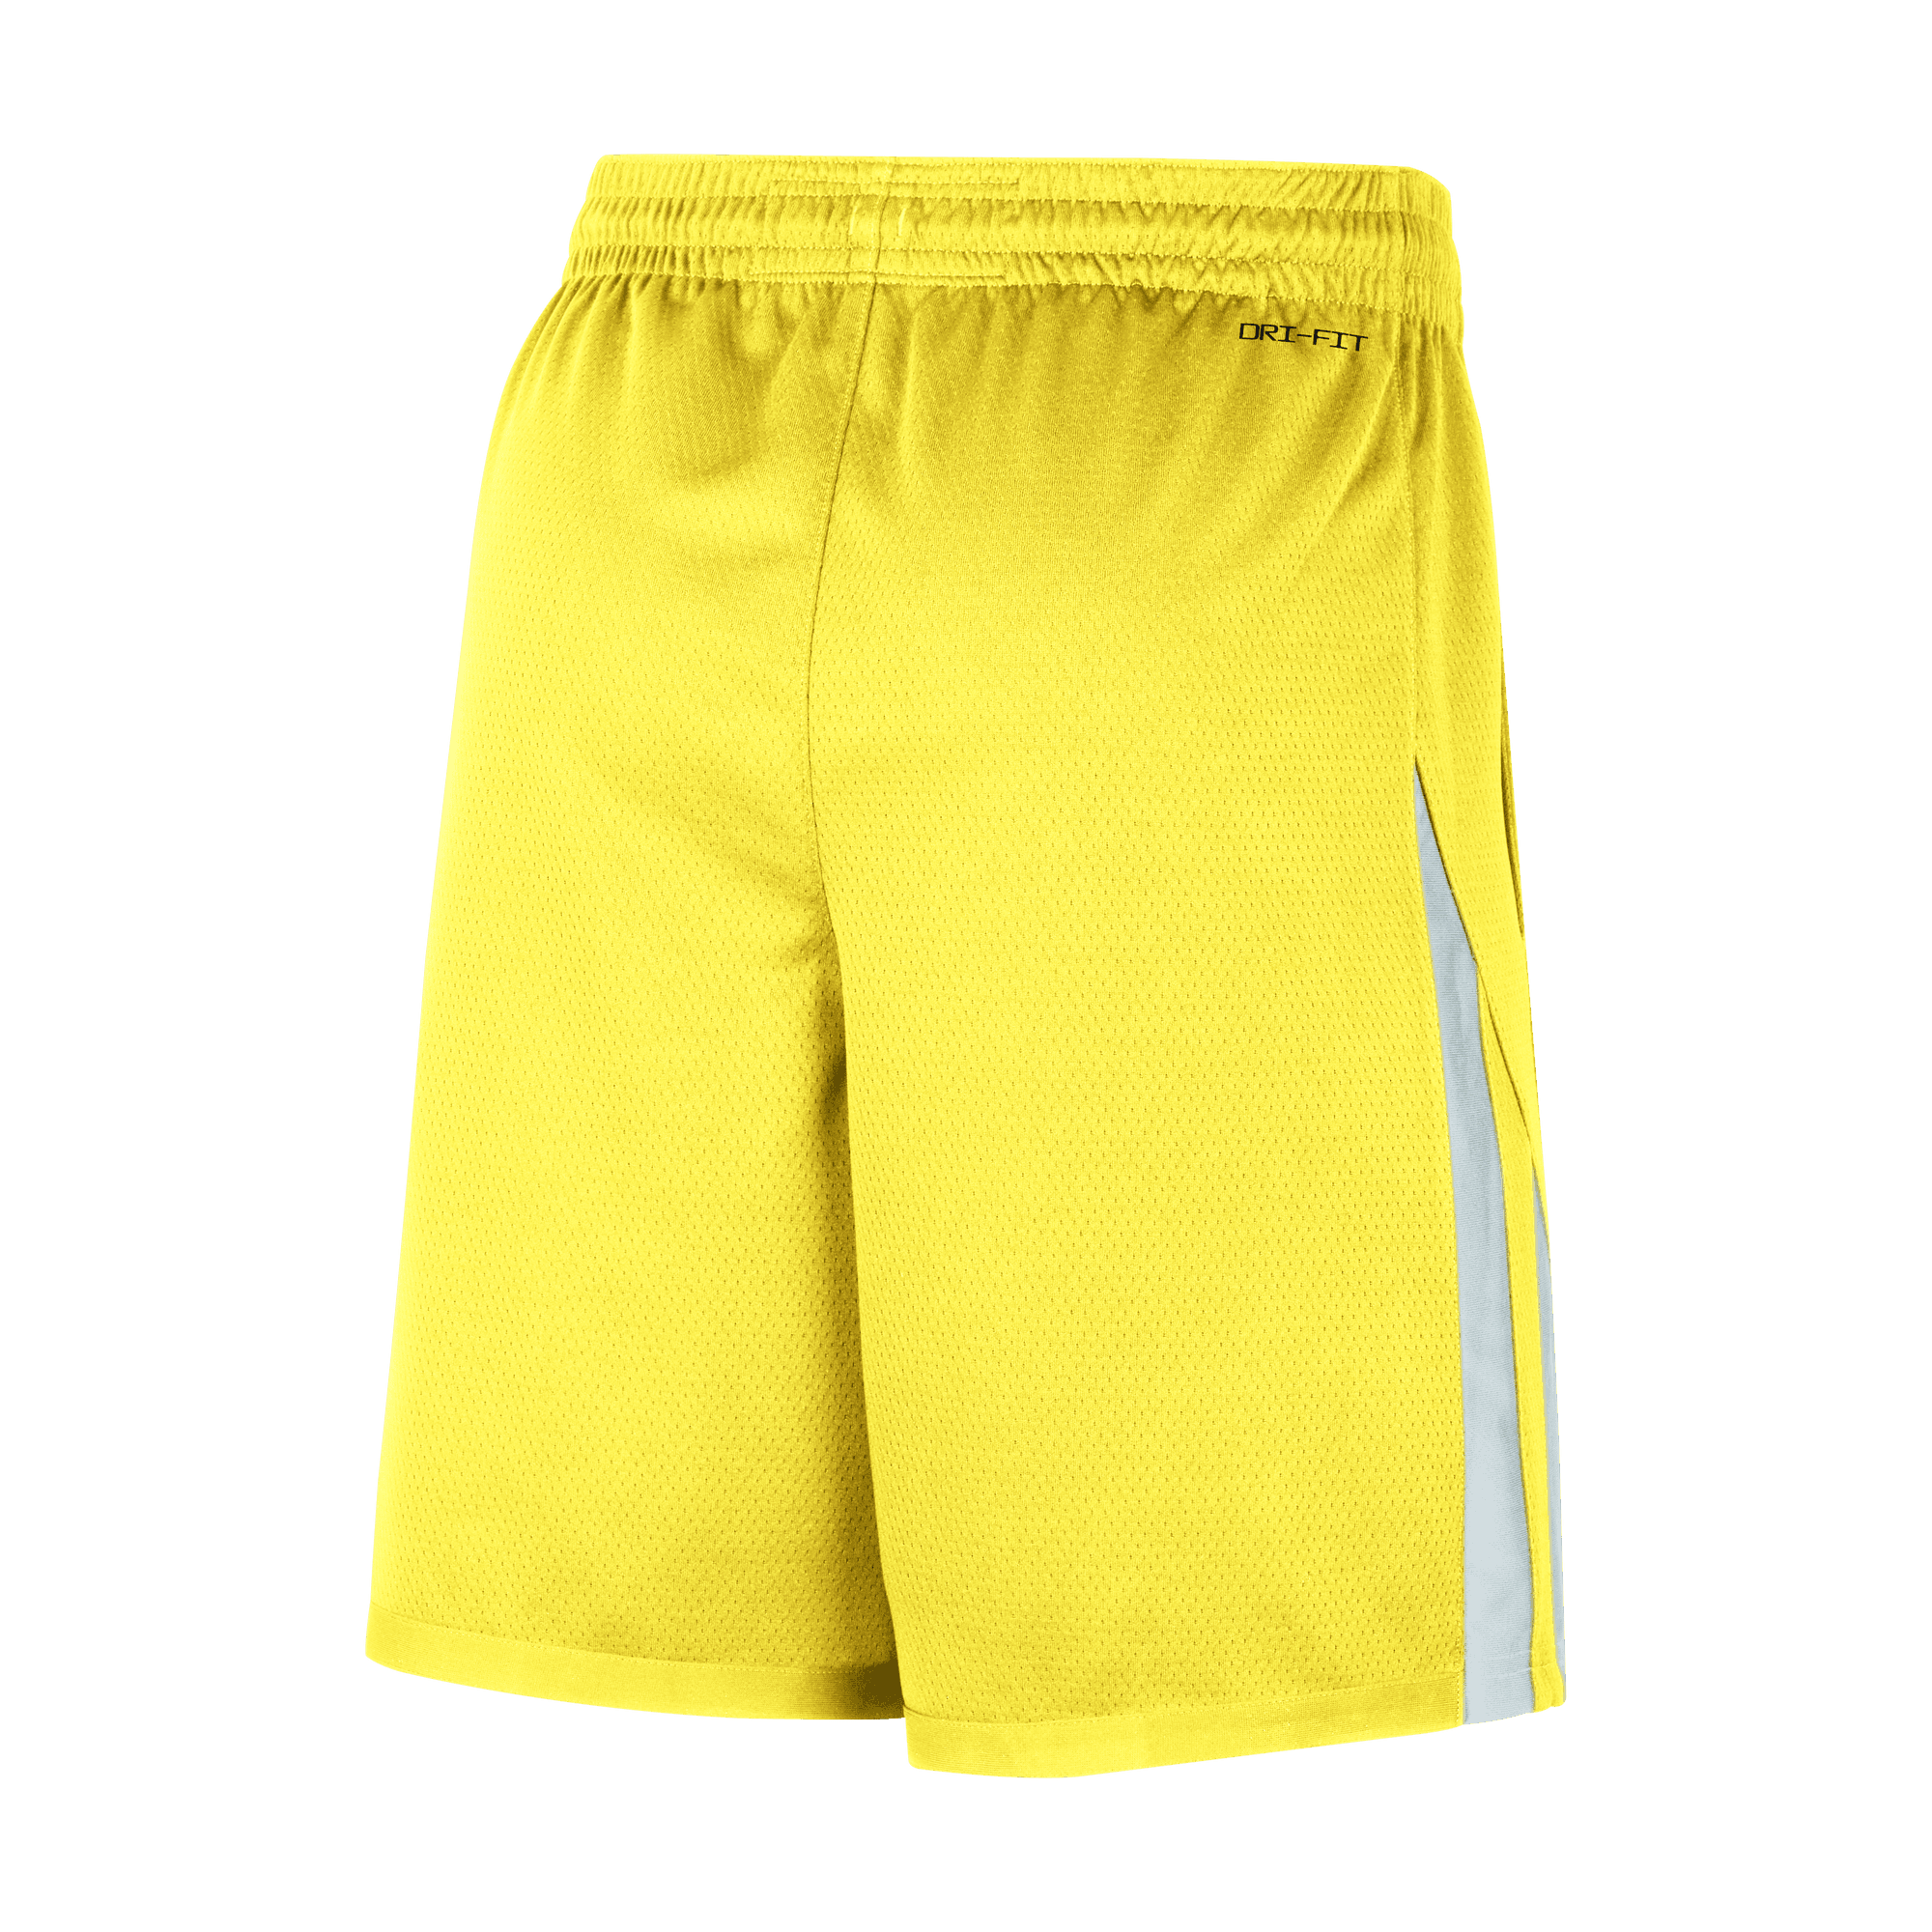 Exclusive Junior Jazz Gear Now Available! – Utah Jazz Youth